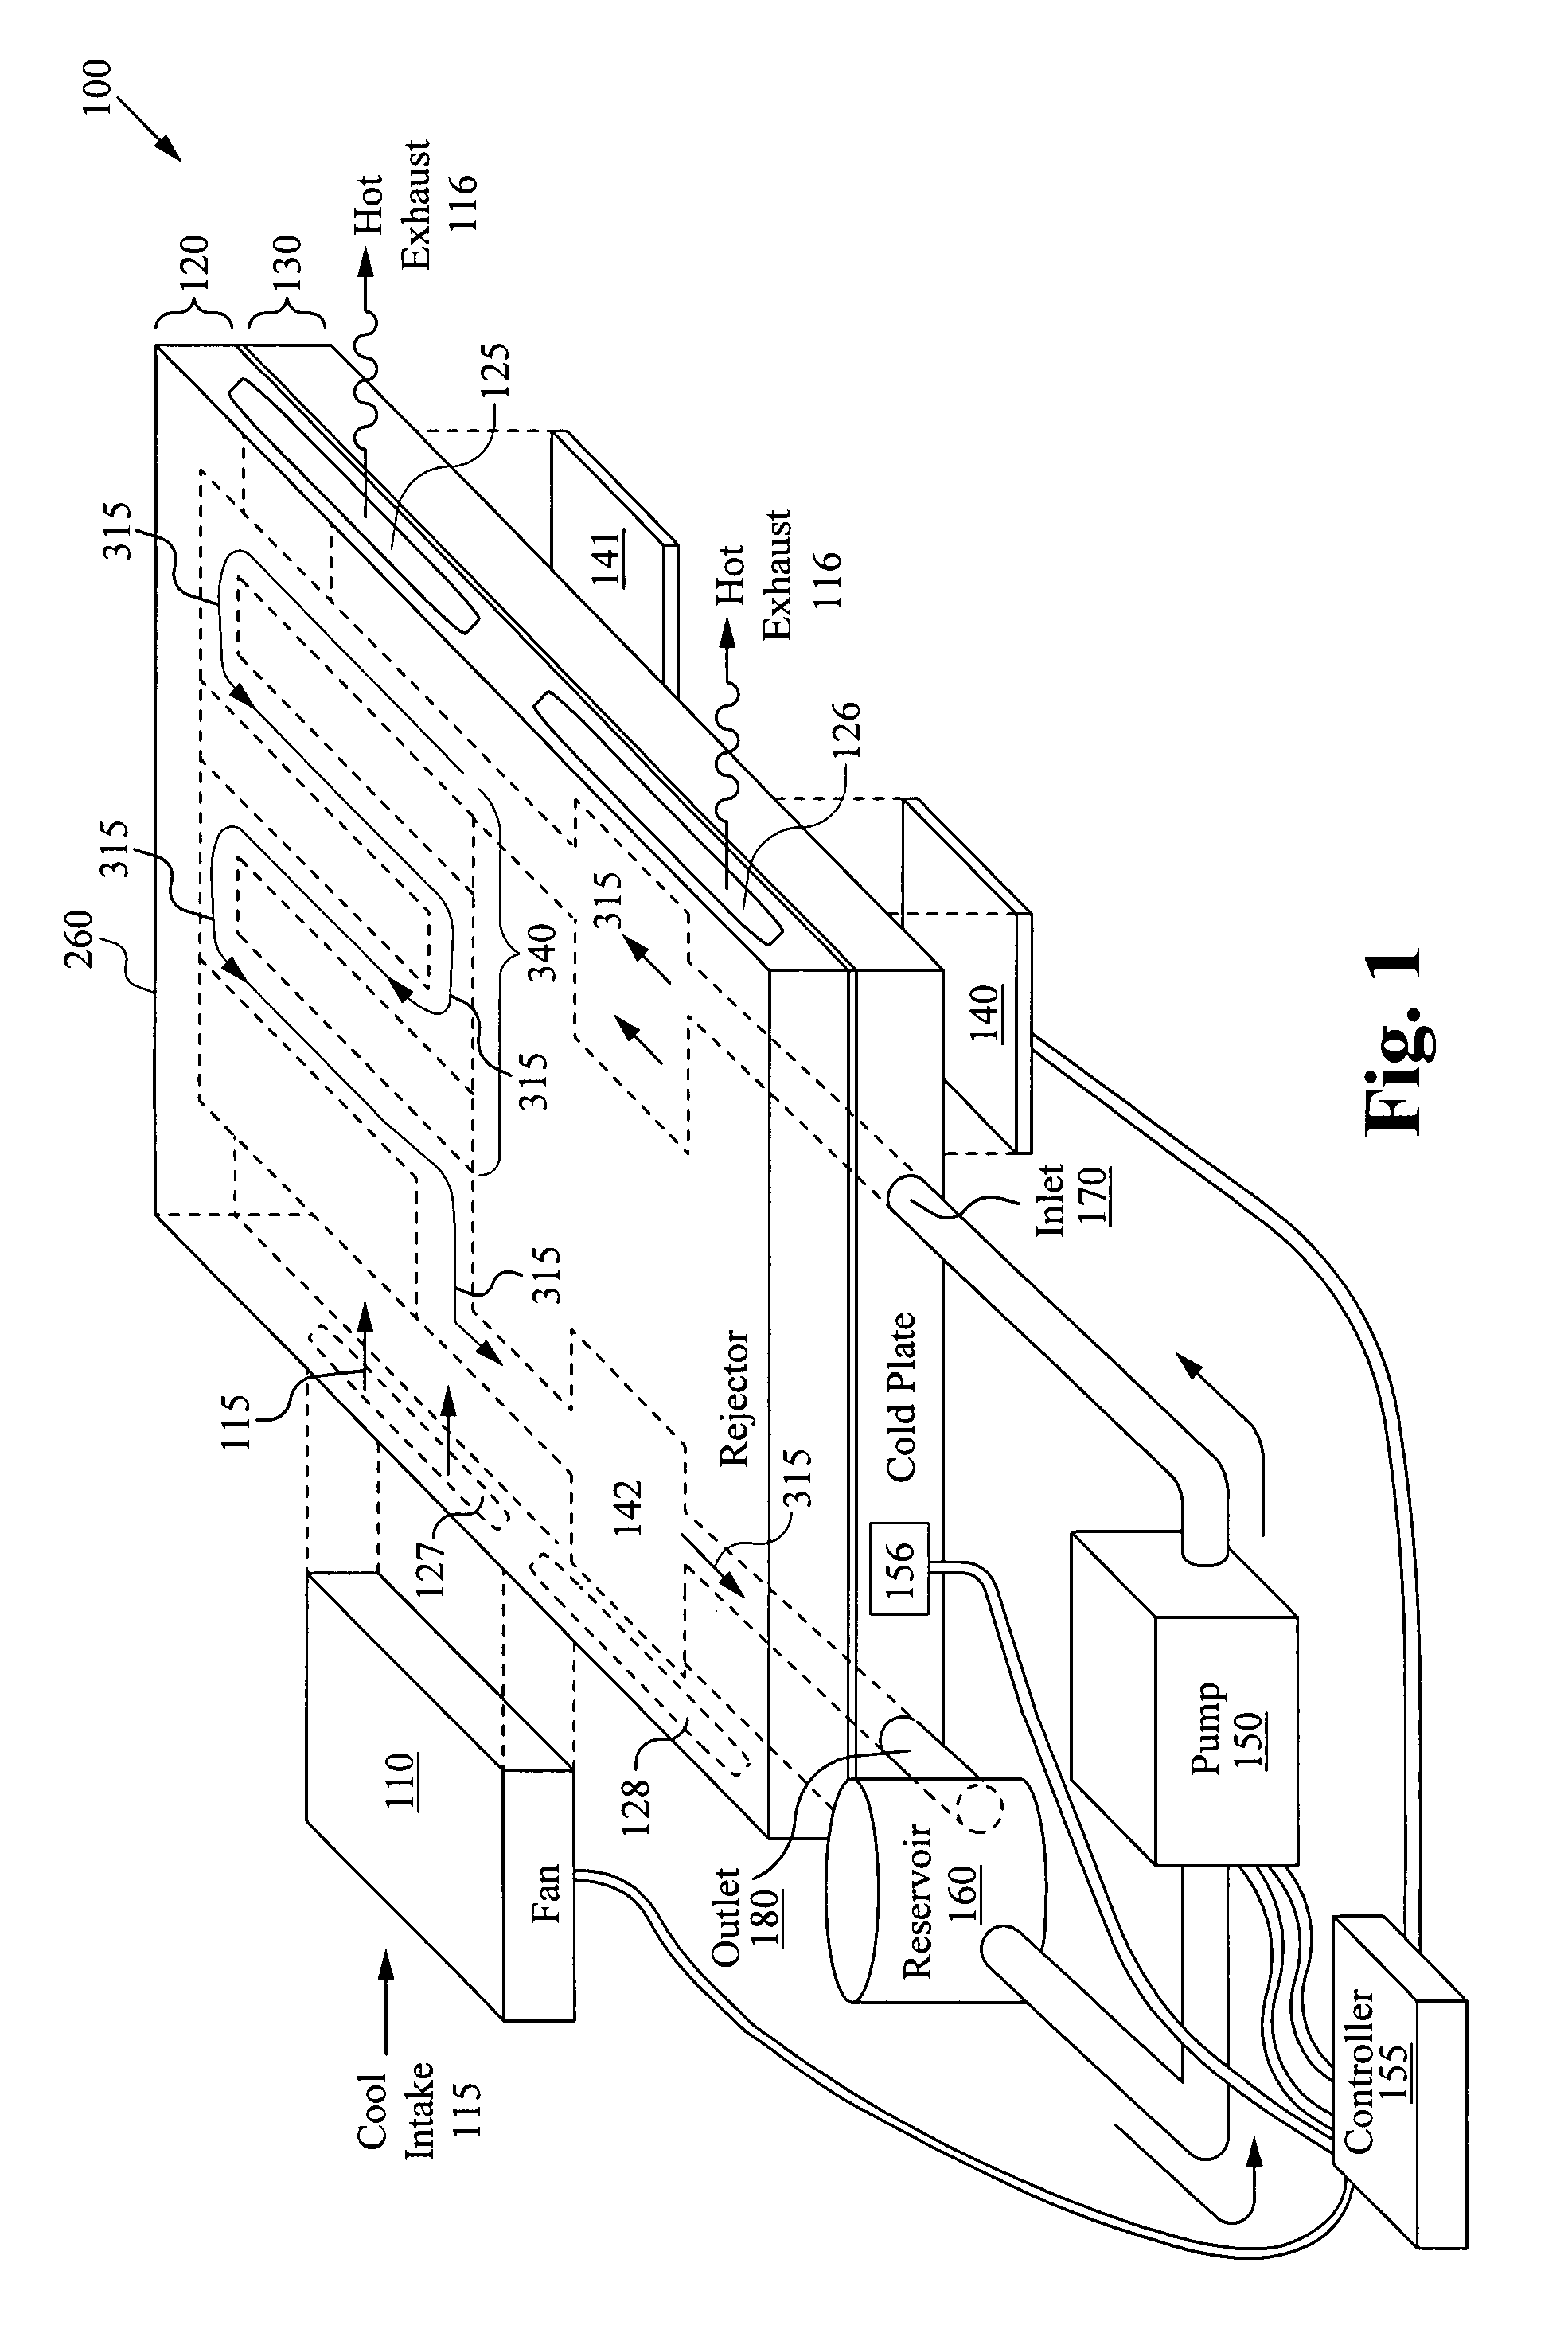 Integrated liquid to air conduction module